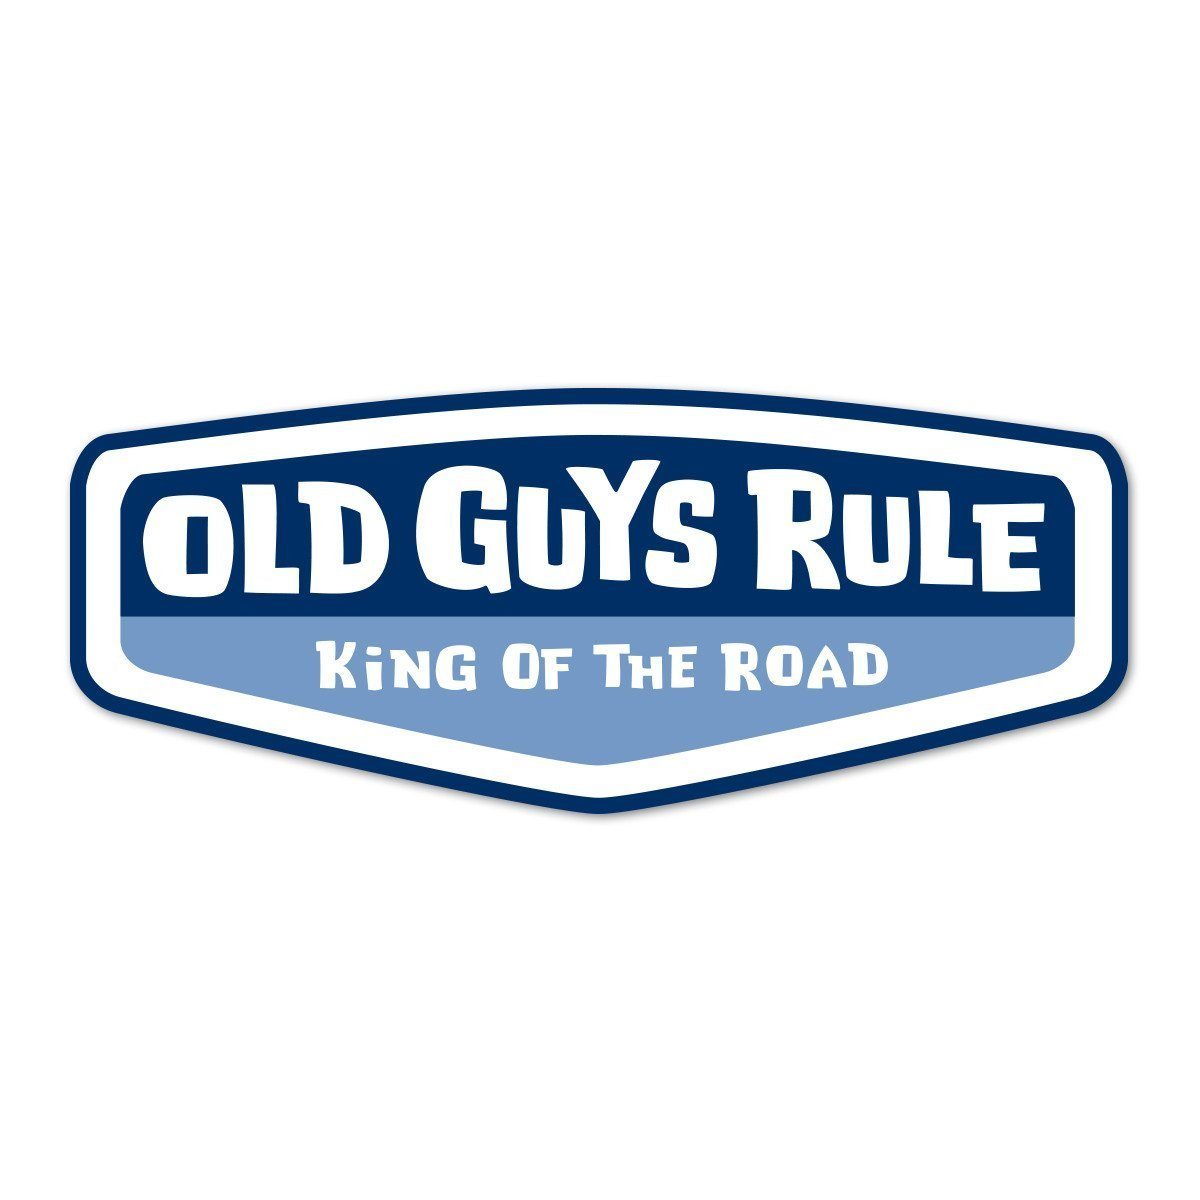 Old Guys Rule - Sticker - King of the Road (Blue)